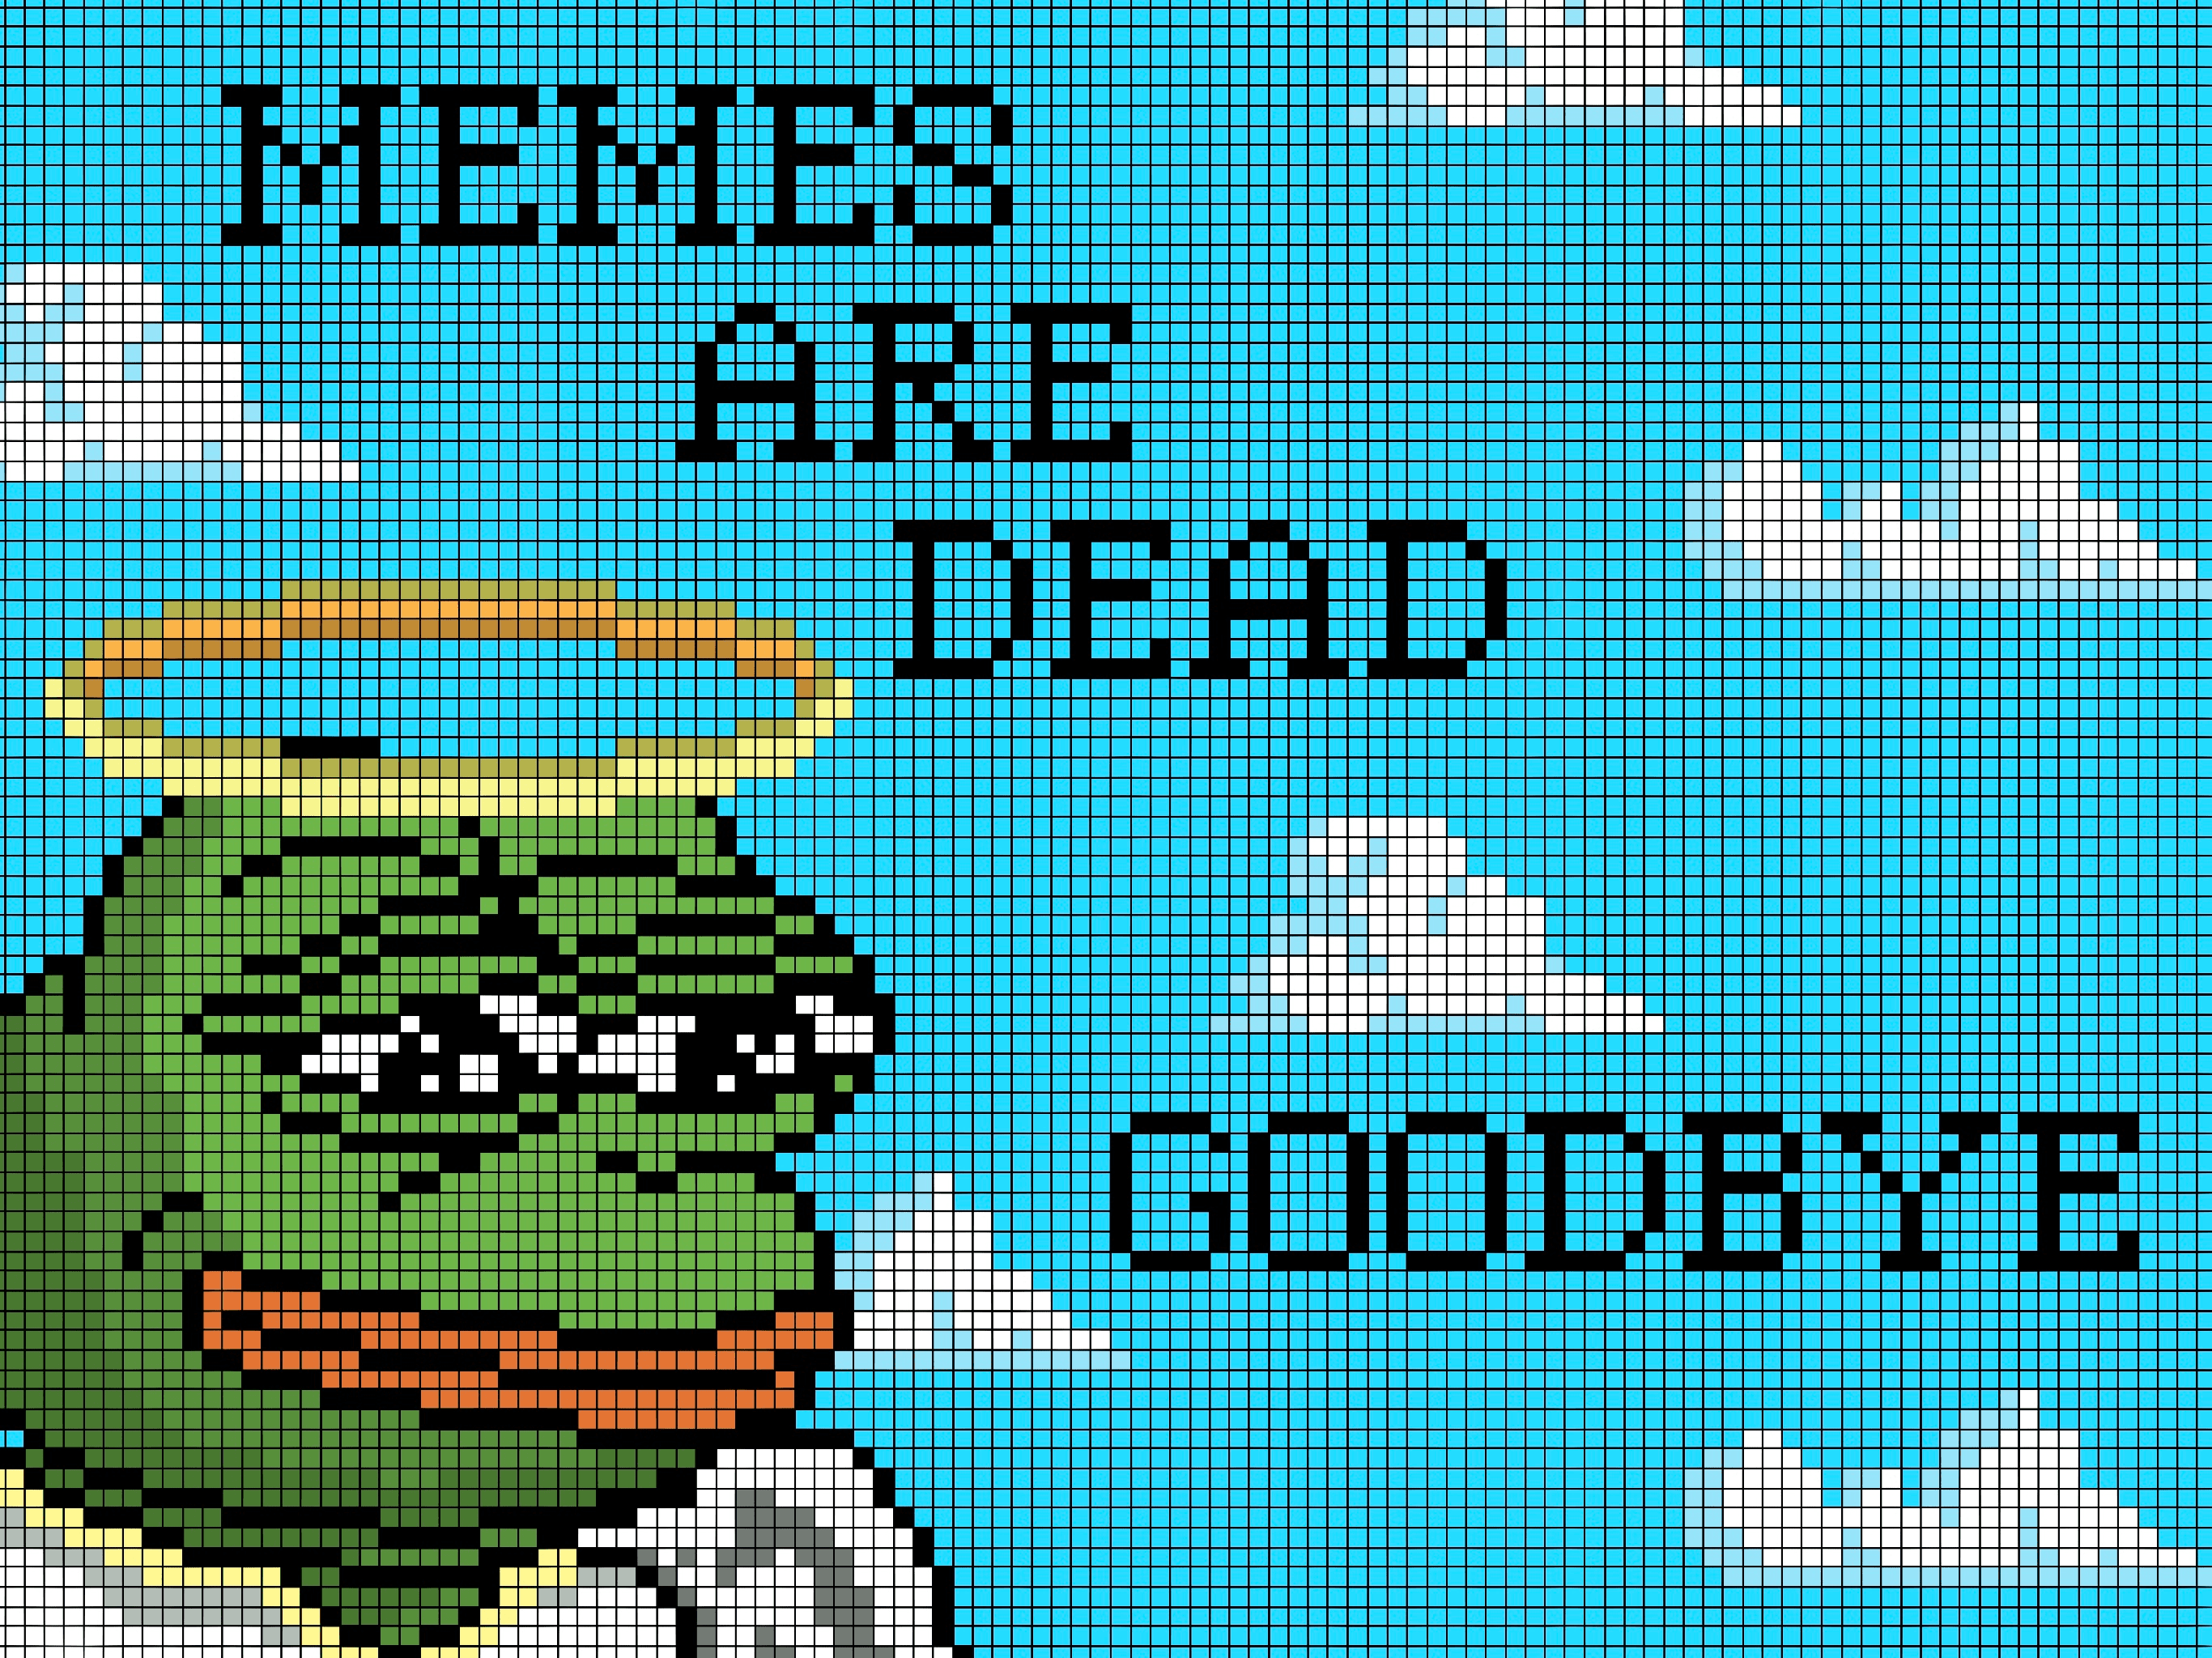 Memes are dead